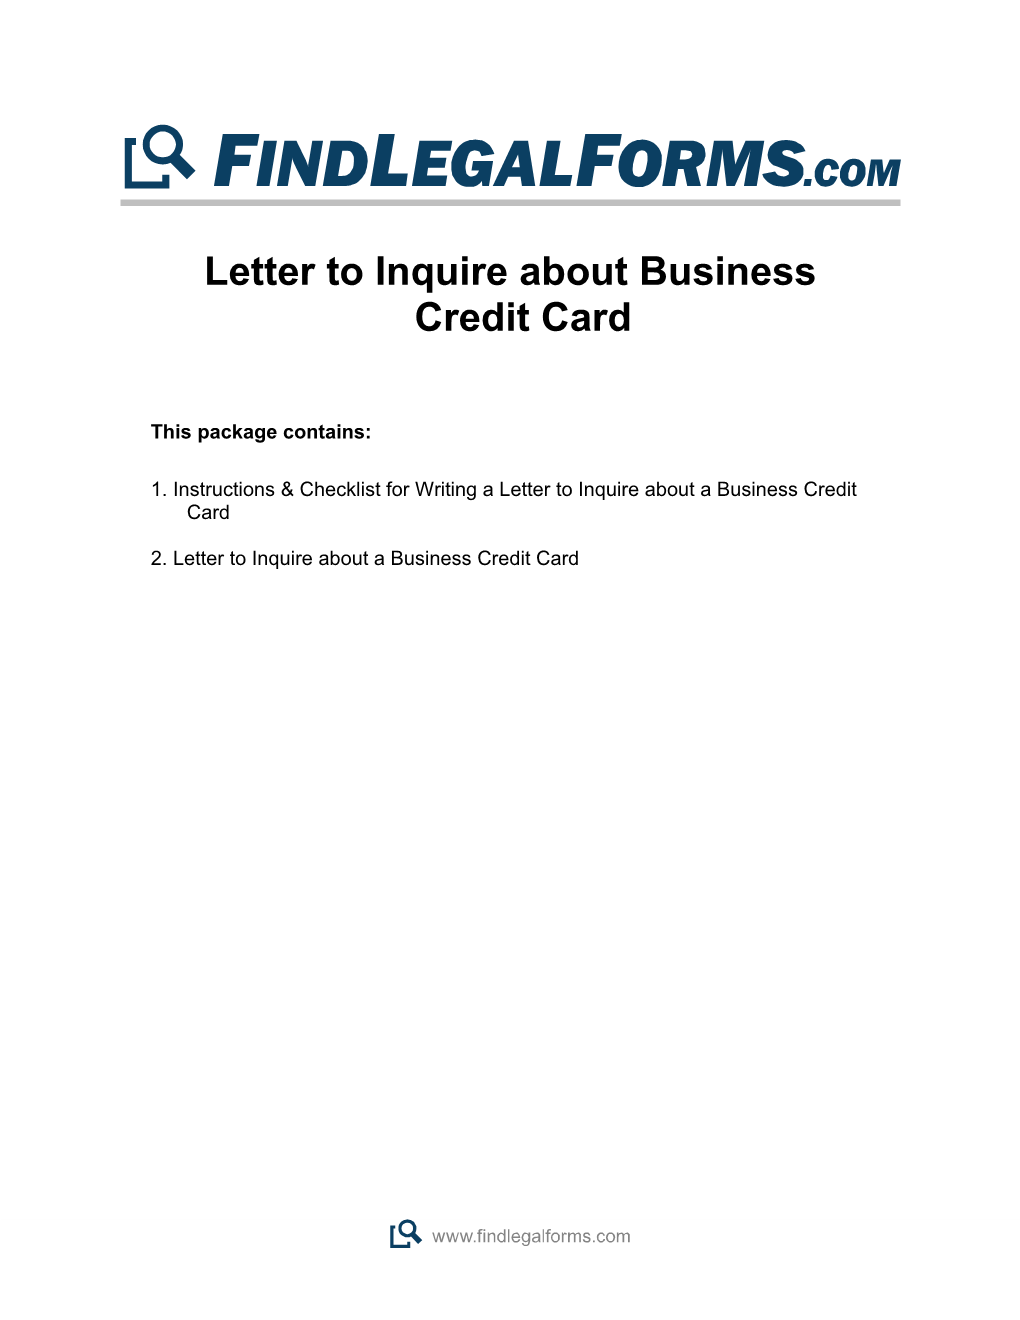 Letter to Inquire About Business Credit Card